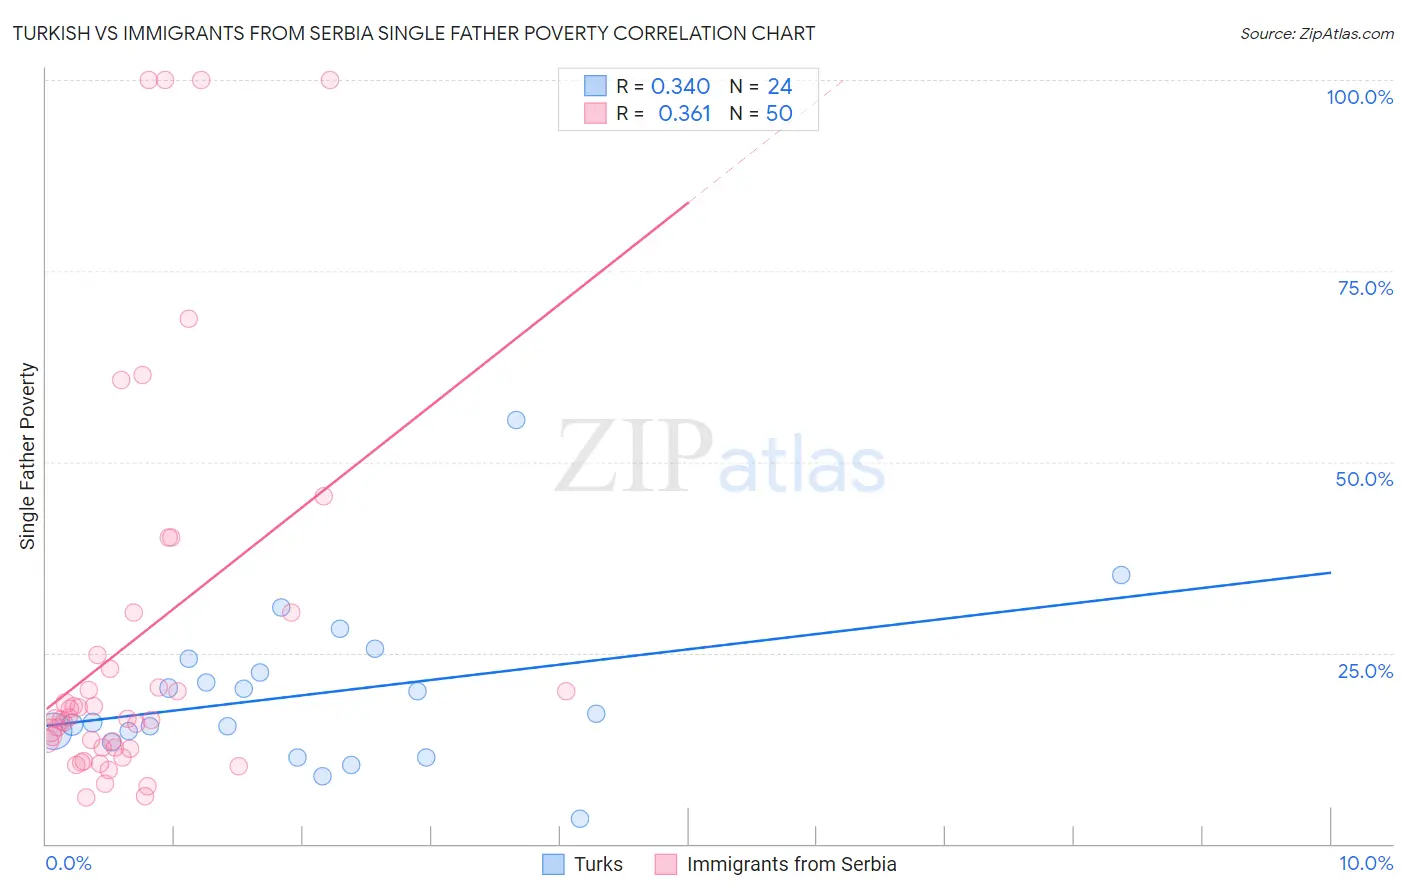 Turkish vs Immigrants from Serbia Single Father Poverty